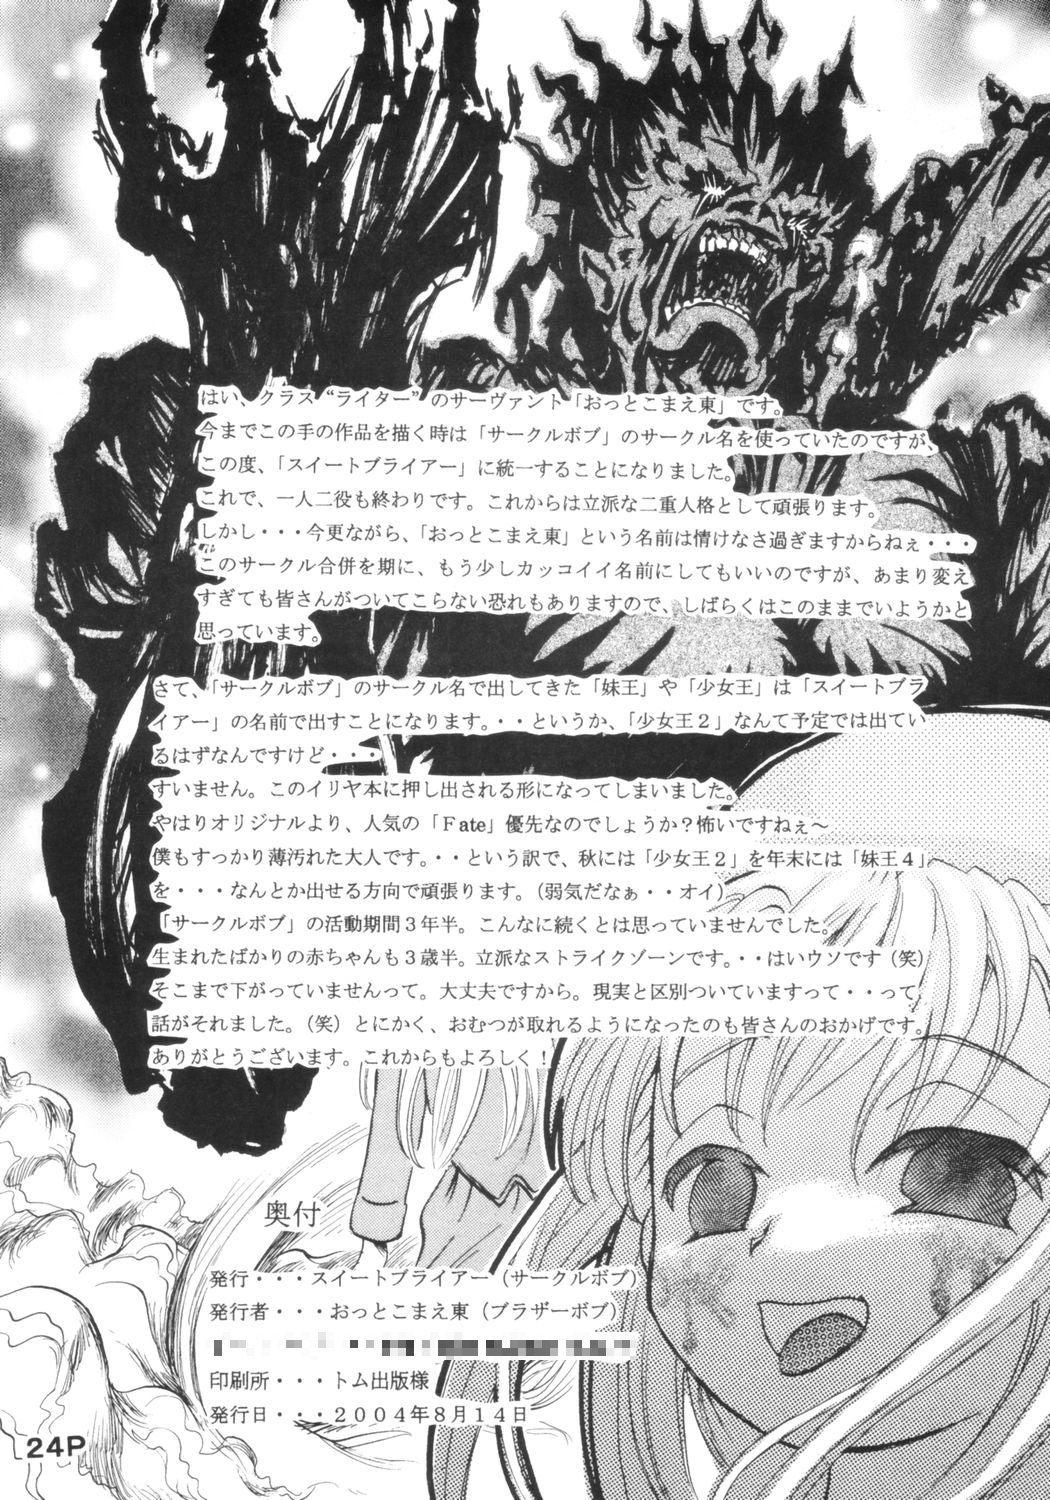 Movie Fate Stay Night Fan Book Vol. 1 - Fate stay night Jerk Off Instruction - Page 25